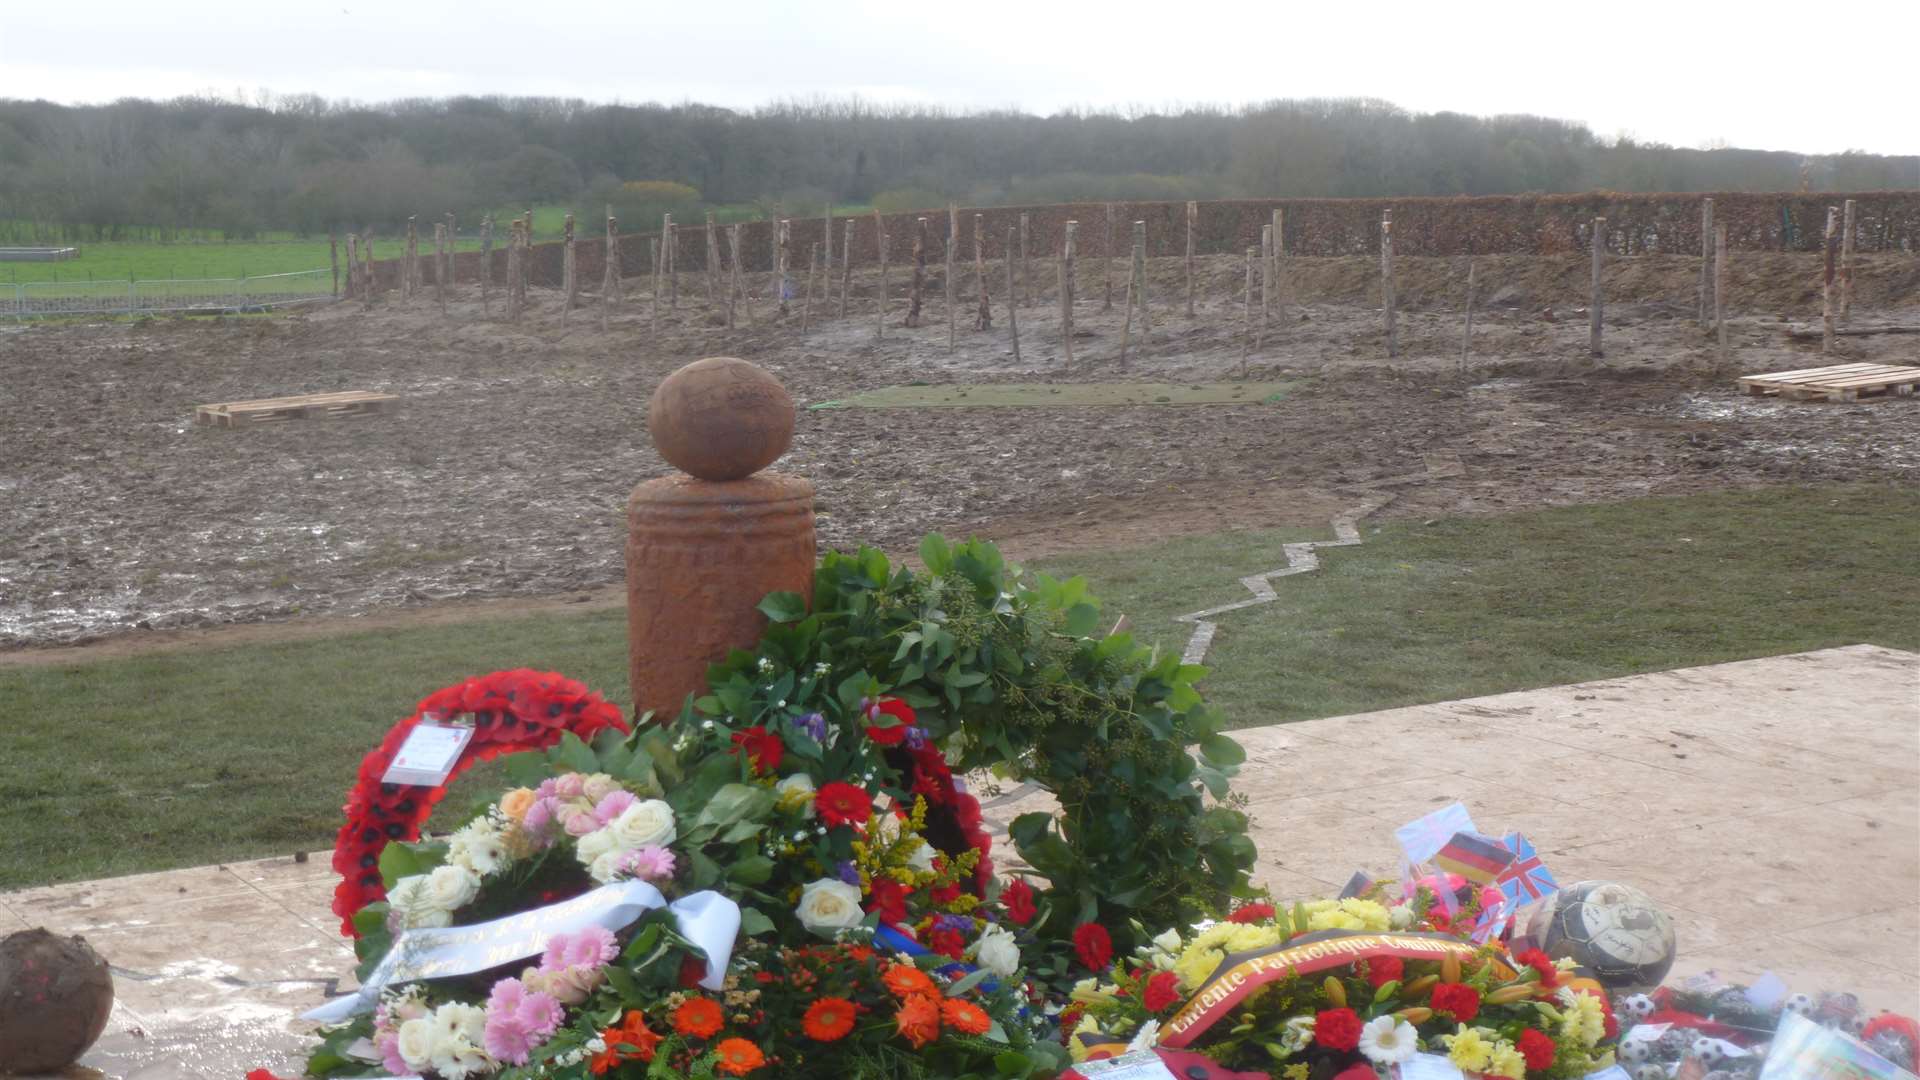 A new memorial to the Christmas Truce football match in Comines-Warneton including an old-fashioned ball on top of a German shell dug out of the ground